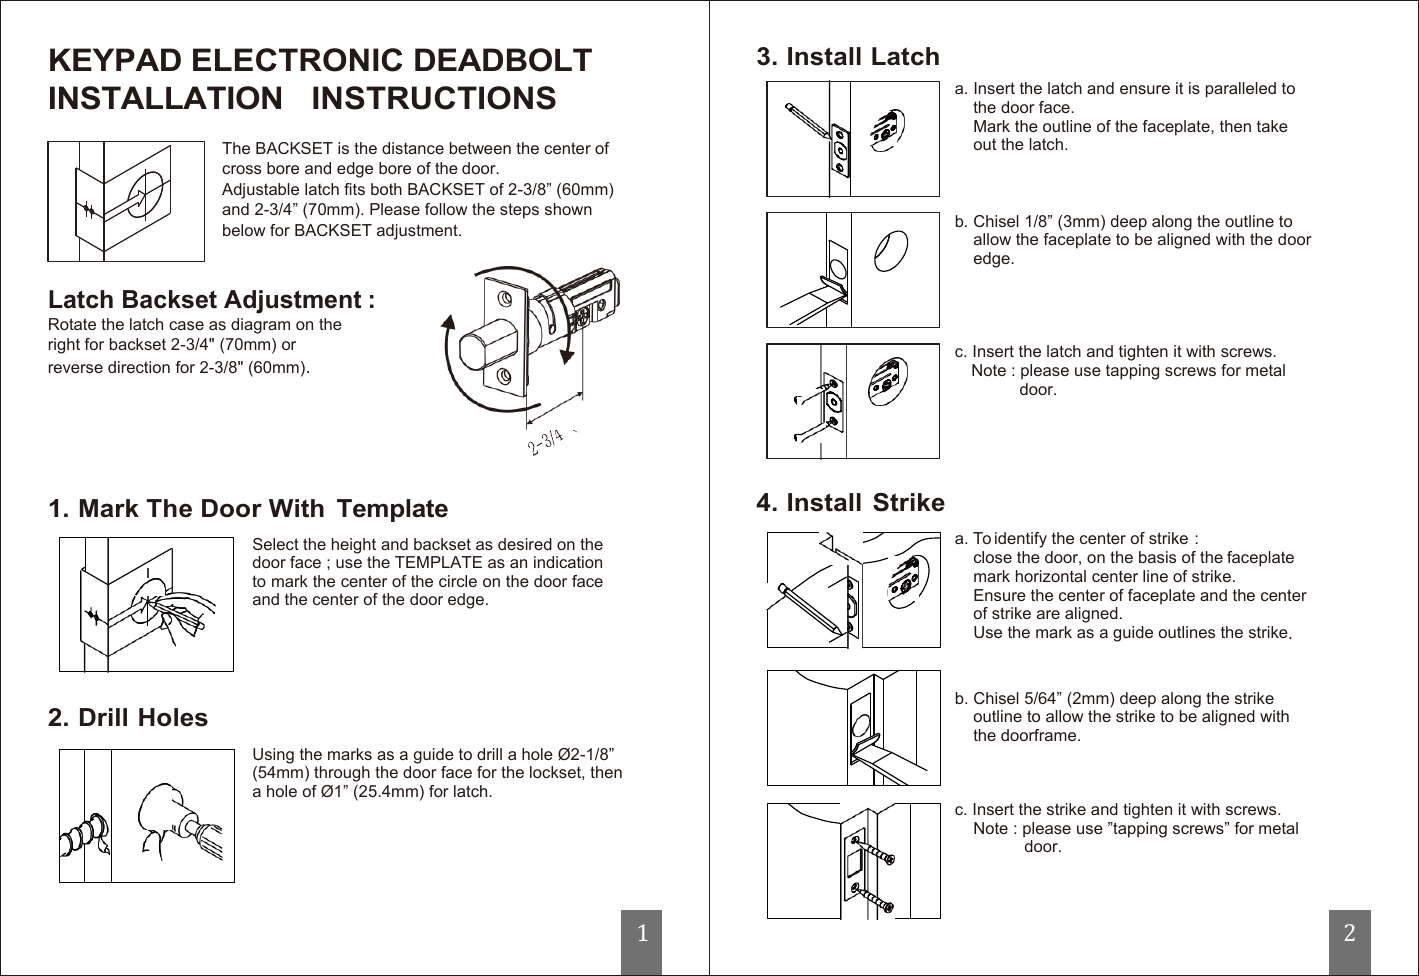        KEYPAD ELECTRONIC DEADBOLT INSTALLATION   INSTRUCTIONS The BACKSET is the distance between the center of cross bore and edge bore of the door. Adjustable latch fits both BACKSET of 2-3/8” (60mm) and 2-3/4” (70mm). Please follow the steps shown below for BACKSET adjustment.   Latch Backset Adjustment : Rotate the latch case as diagram on the right for backset 2-3/4&quot; (70mm) or reverse direction for 2-3/8&quot; (60mm).      1. Mark The Door With  Template Select the height and backset as desired on the door face ; use the TEMPLATE as an indication to mark the center of the circle on the door face and the center of the door edge.      2. Drill Holes Using the marks as a guide to drill a hole Ø2-1/8” (54mm) through the door face for the lockset, then a hole of Ø1” (25.4mm) for latch.                                 1  3. Install Latch       4. Install  Strike     a. Insert the latch and ensure it is paralleled to the door face. Mark the outline of the faceplate, then take out the latch.    b. Chisel 1/8” (3mm) deep along the outline to allow the faceplate to be aligned with the door edge.     c. Insert the latch and tighten it with screws. Note : please use tapping screws for metal door.        a. To identify the center of strike : close the door, on the basis of the faceplate mark horizontal center line of strike. Ensure the center of faceplate and the center of strike are aligned. Use the mark as a guide outlines the strike.   b. Chisel 5/64” (2mm) deep along the strike outline to allow the strike to be aligned with the doorframe.    c. Insert the strike and tighten it with screws. Note : please use ”tapping screws” for metal door.                                 2 